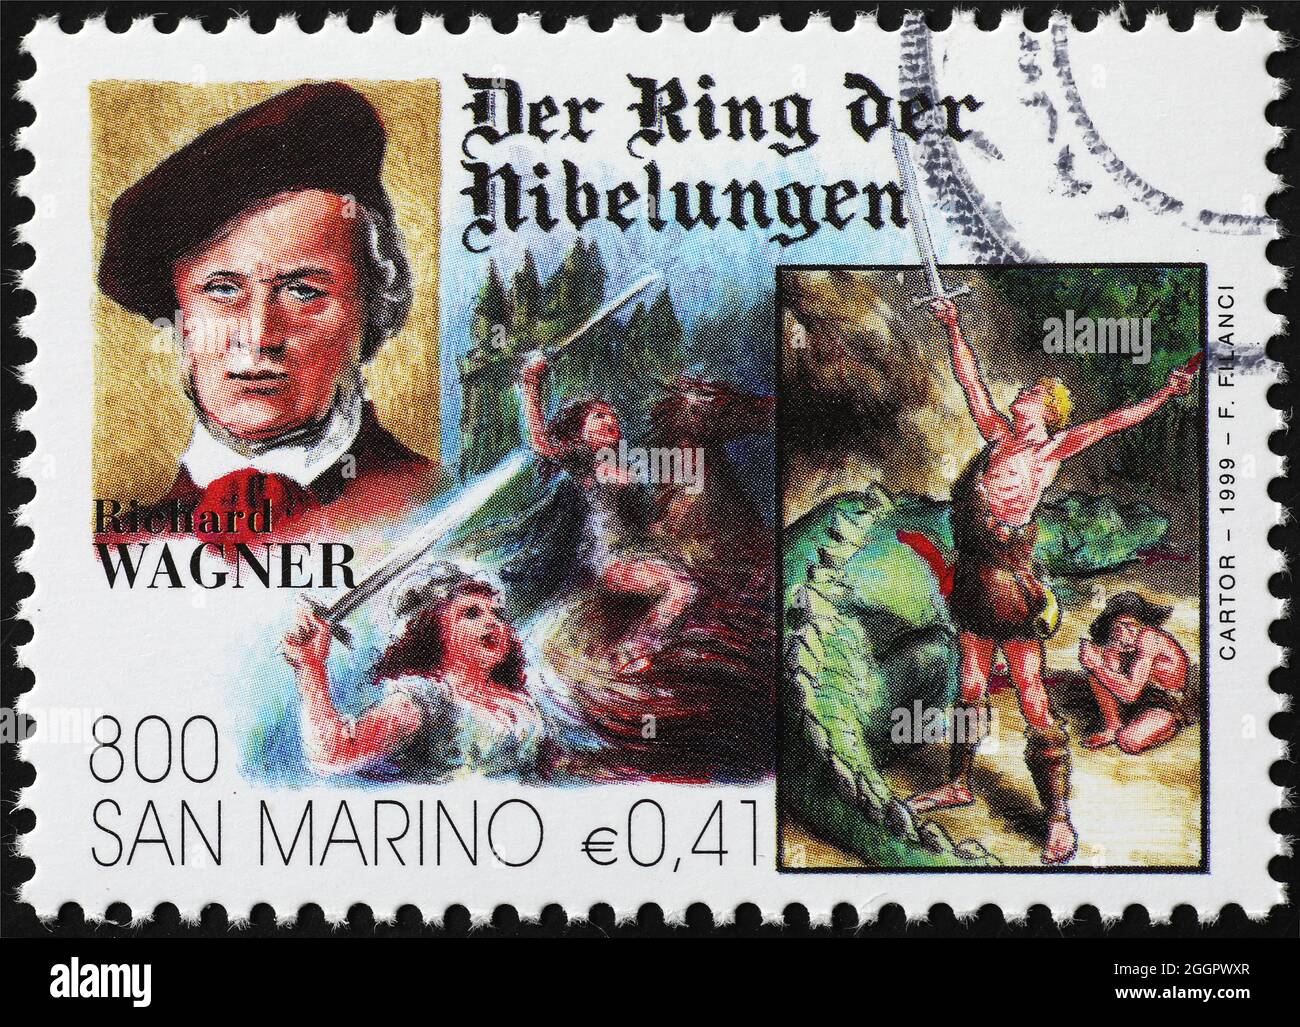 Richard Wagner and his opera The Ring of the Nibelung on stamp Stock Photo